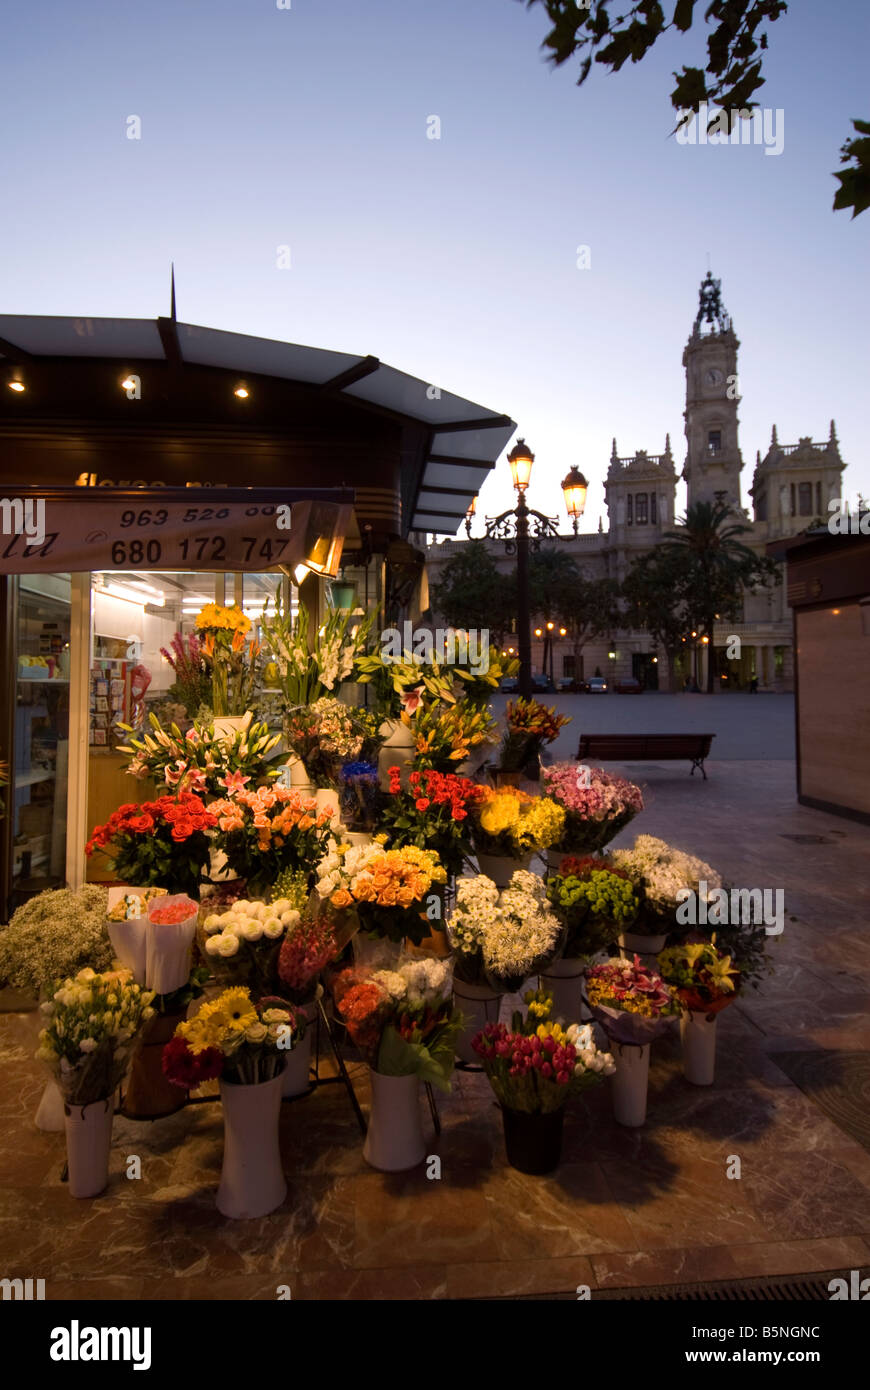 Florist stall on Plaza del Ayuntamiento with the Town Hall building in the background Valencia Spain Stock Photo